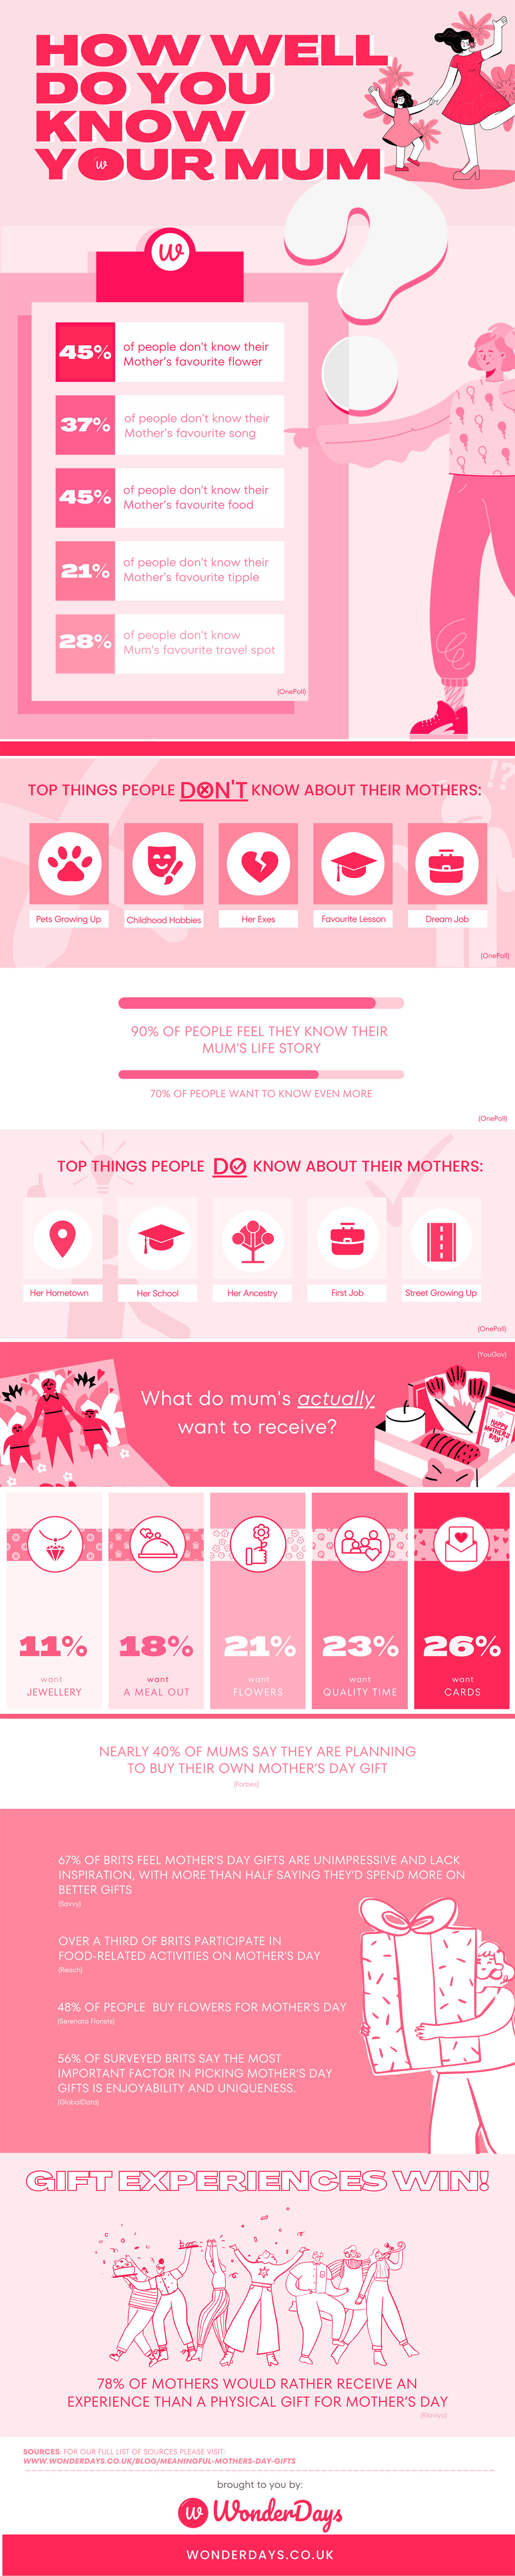 How Well Do You Really Know Your Mum?